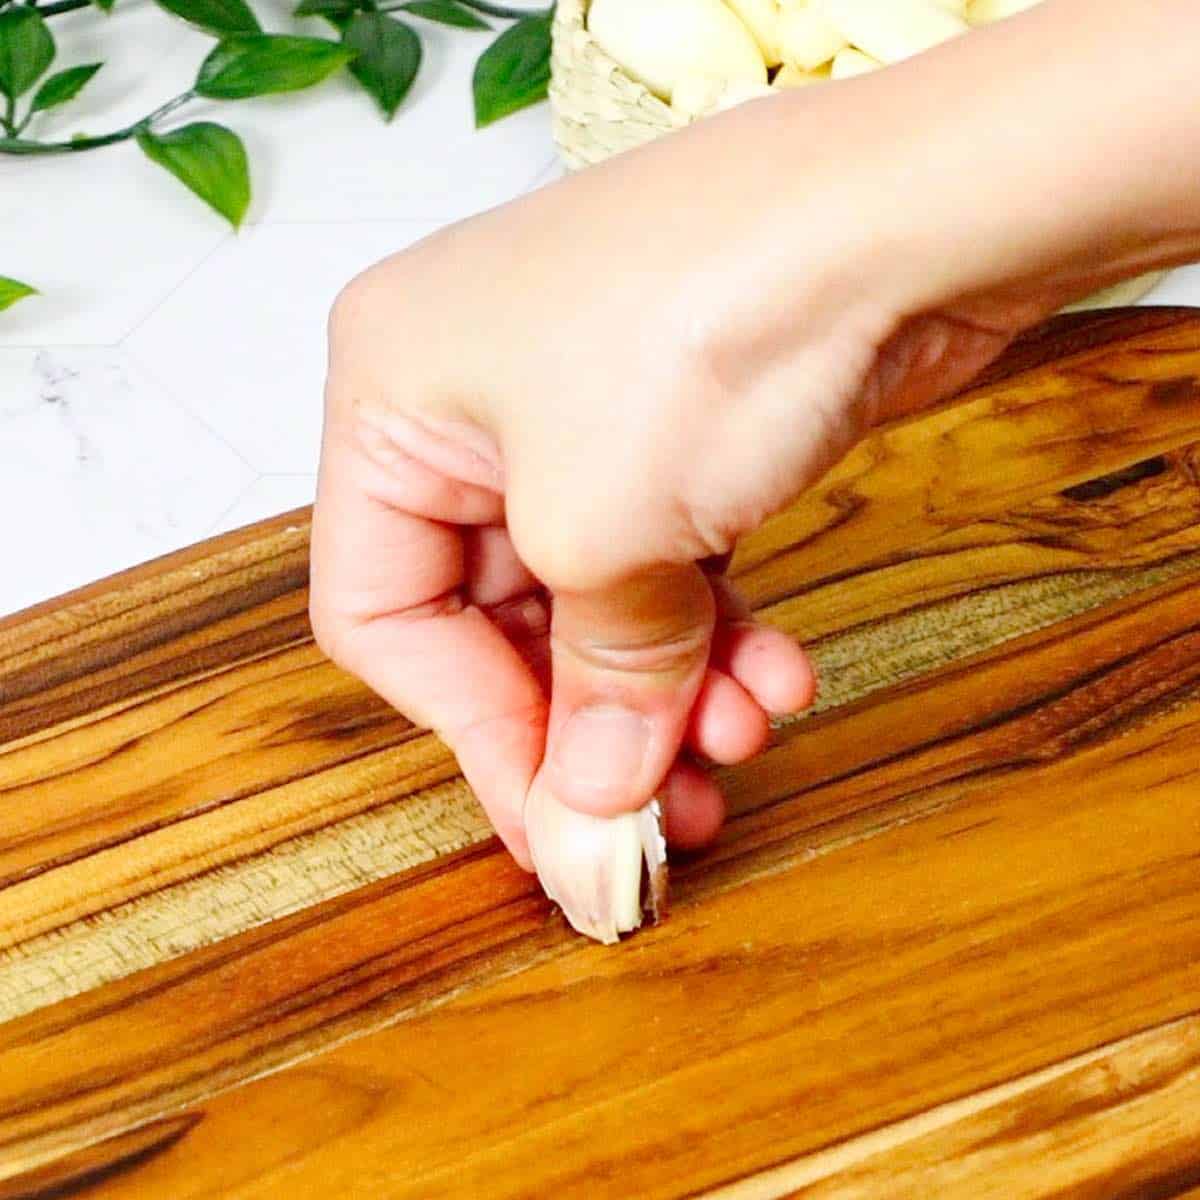 Pushing down the root end of the garlic cloves against a cutting board to crack the peel.